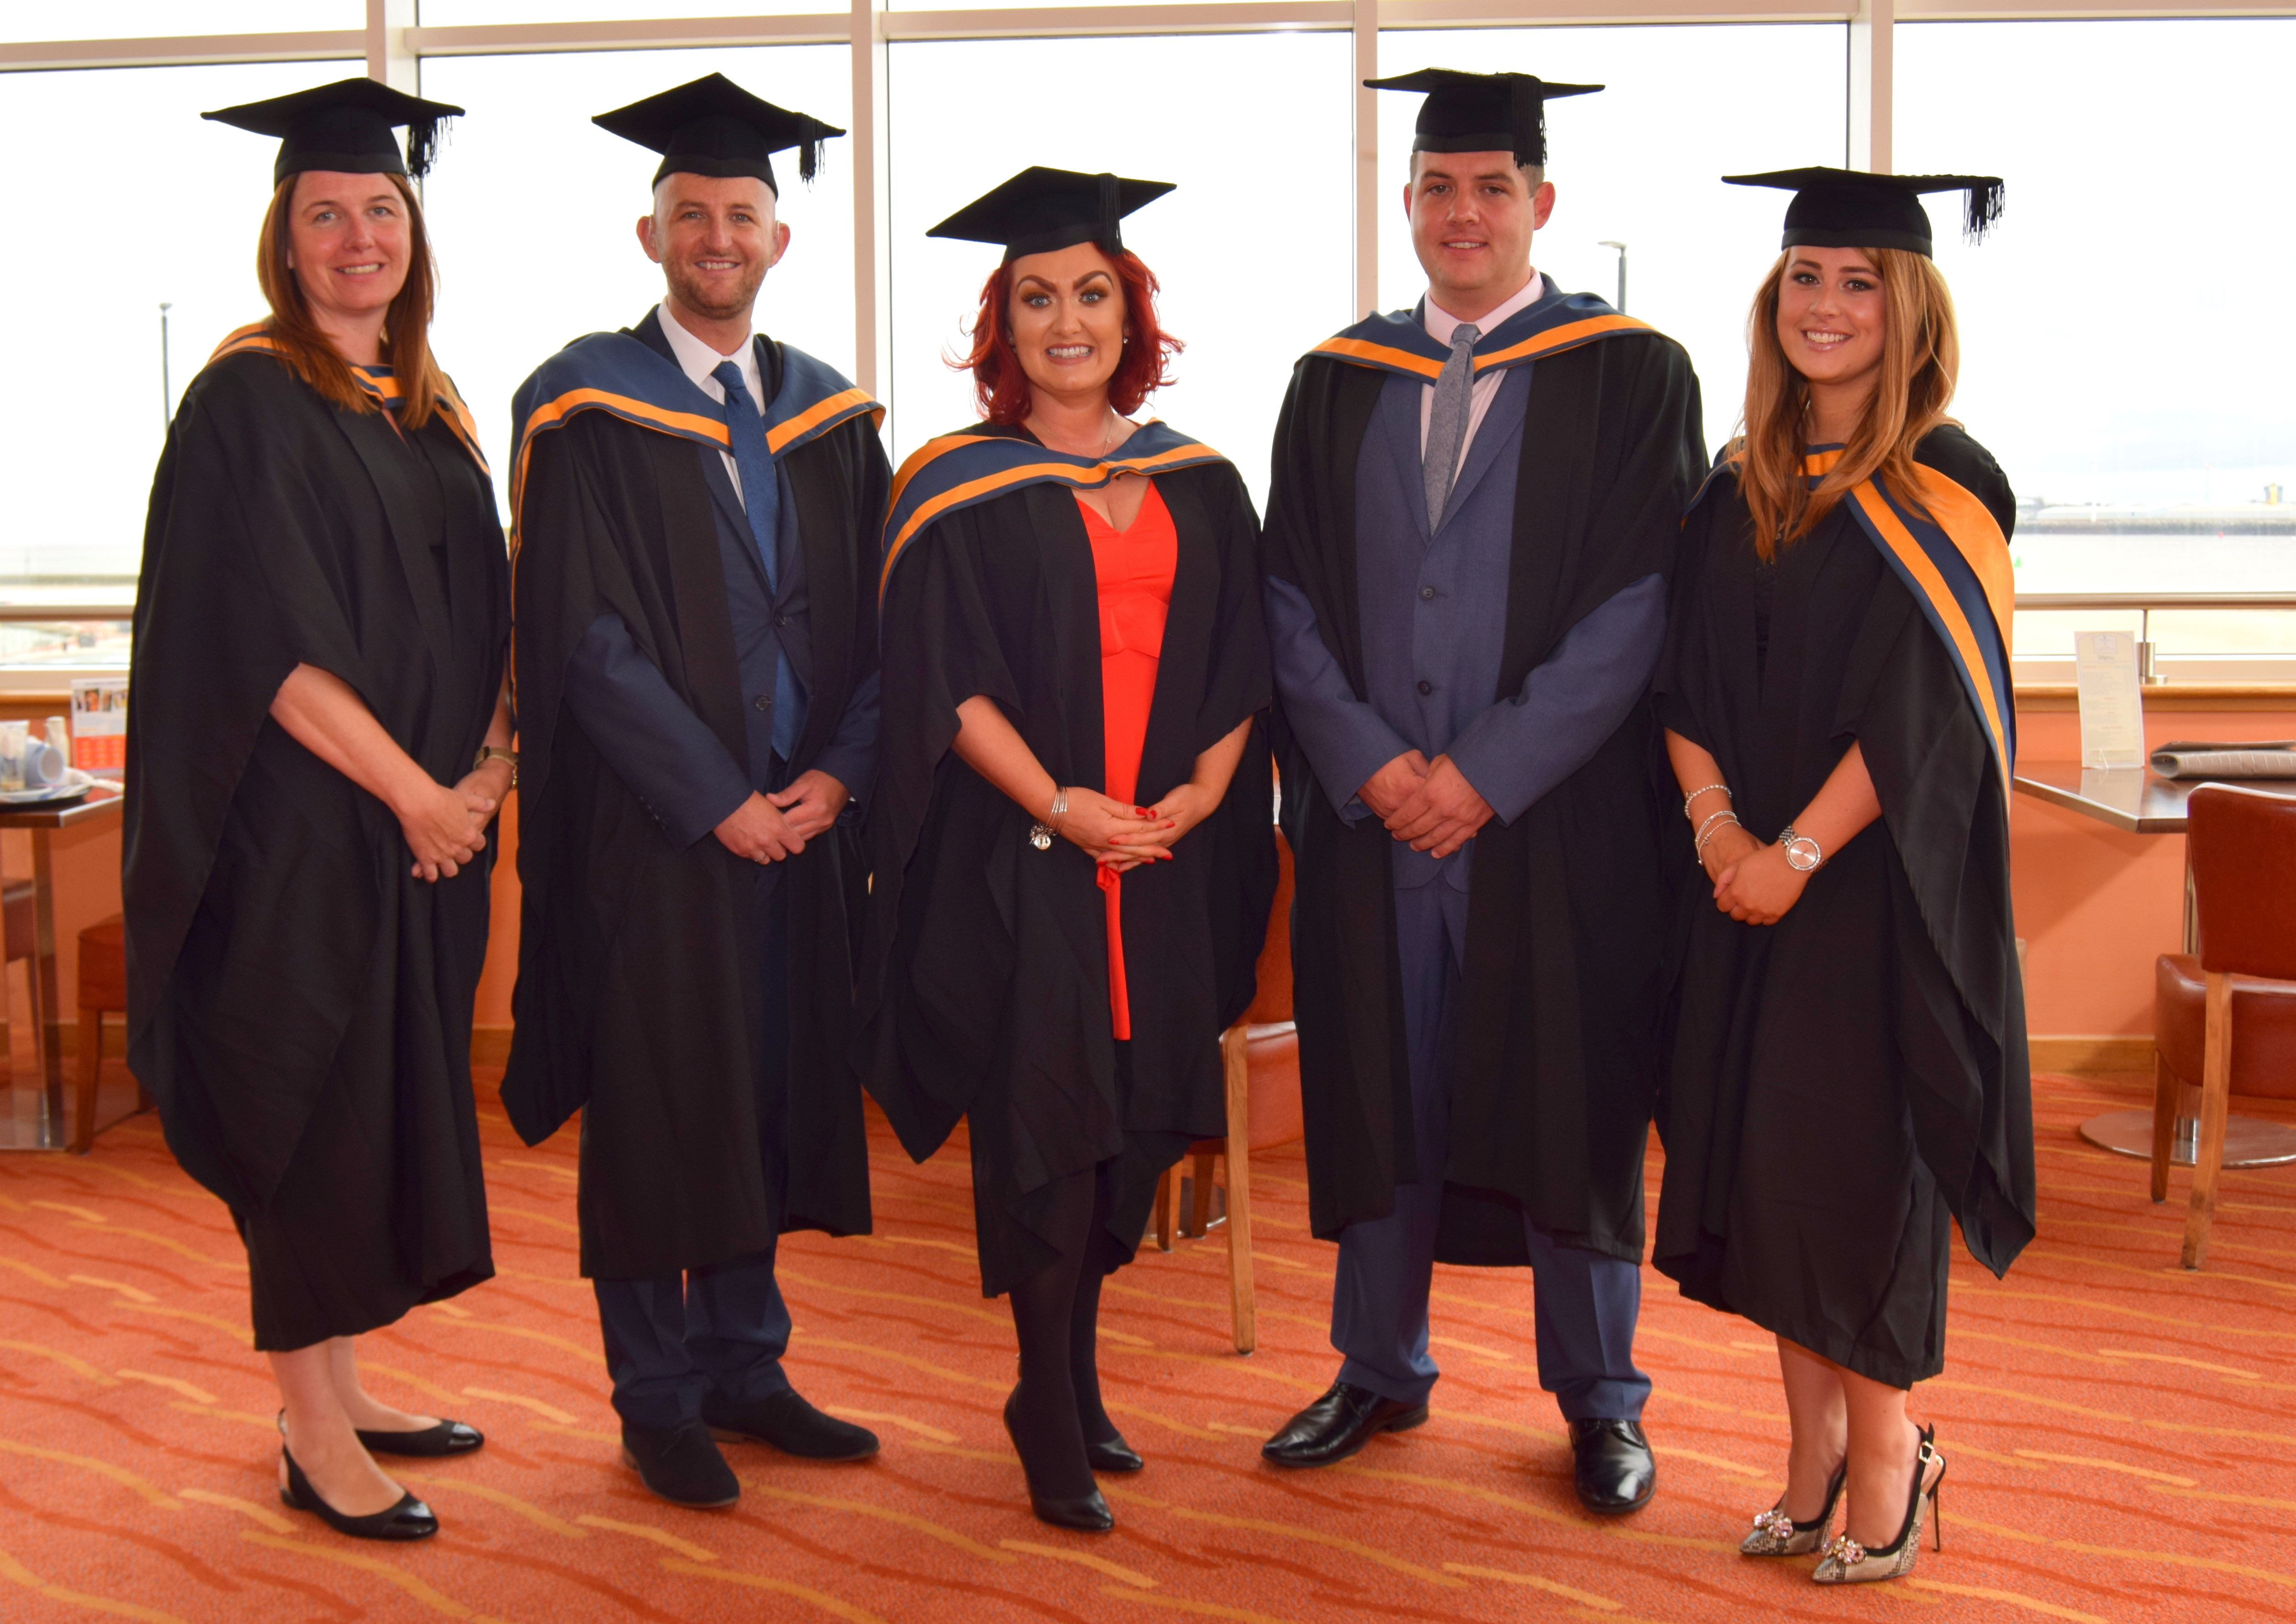 Wirral Met Higher Education graduates wearing gowns and standing on an orange carpet